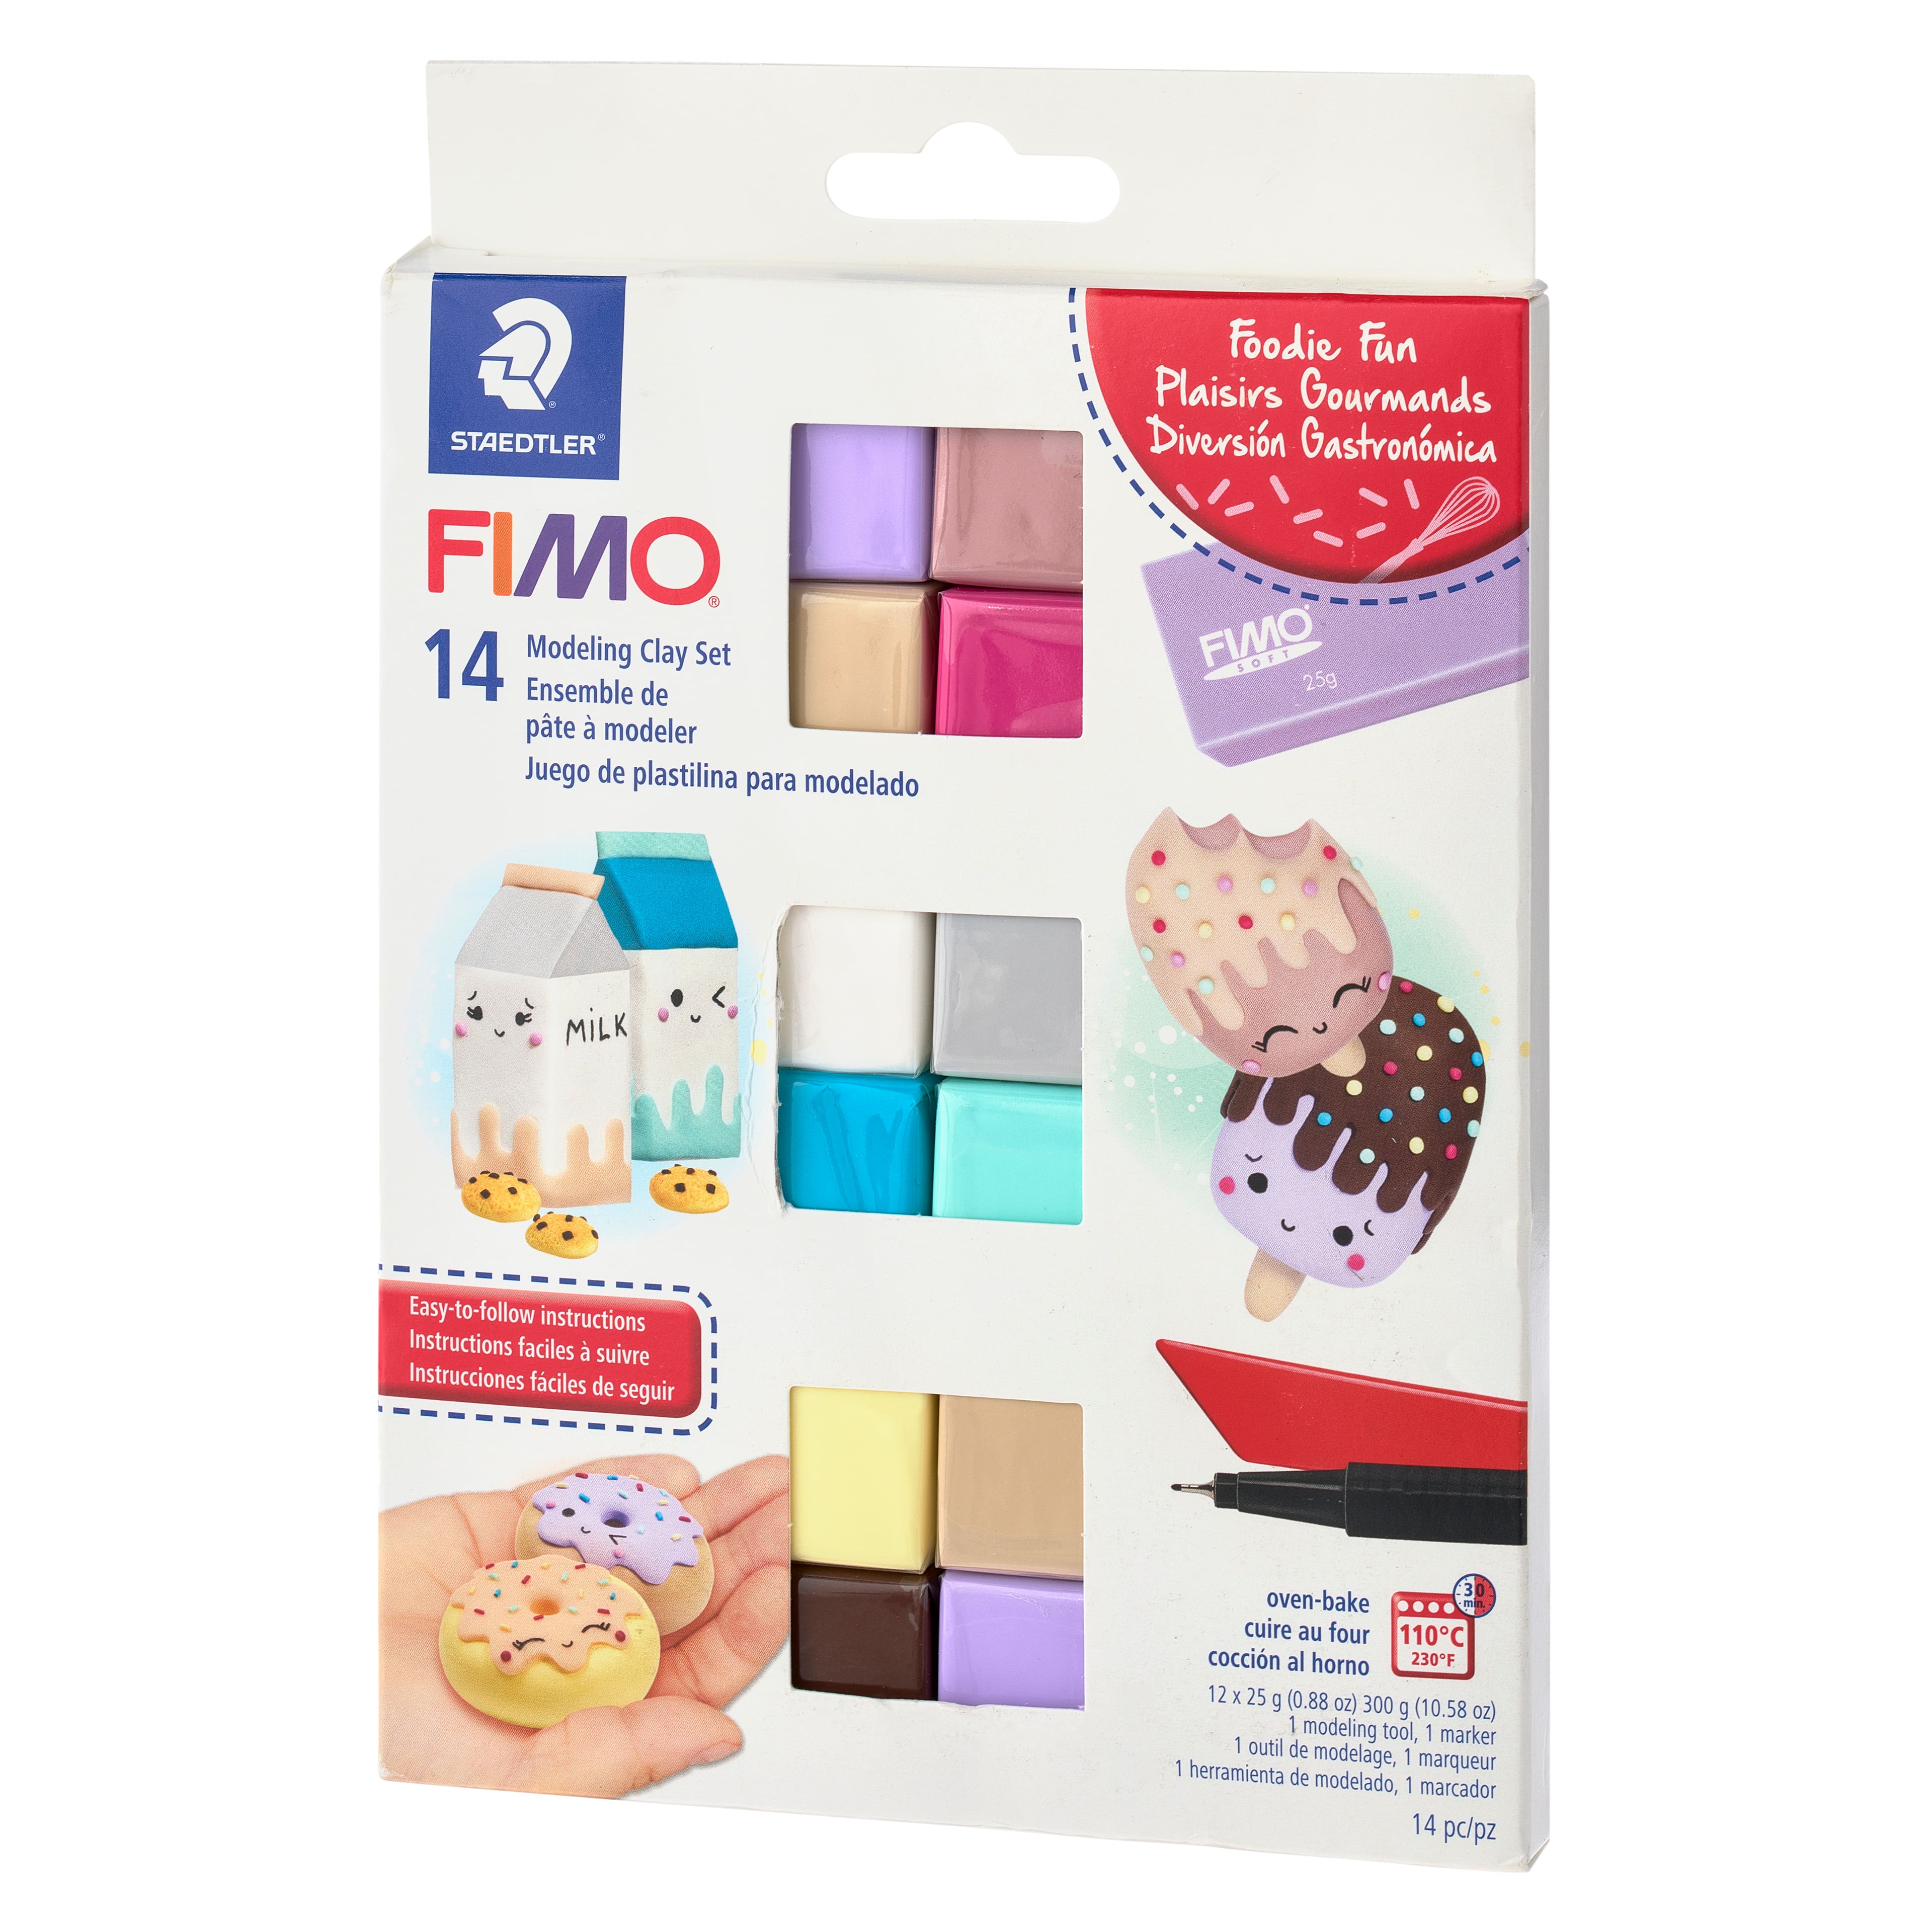 FIMO Soft 454g Polymer Modelling Clay - Oven Bake Clay - Black and White Set